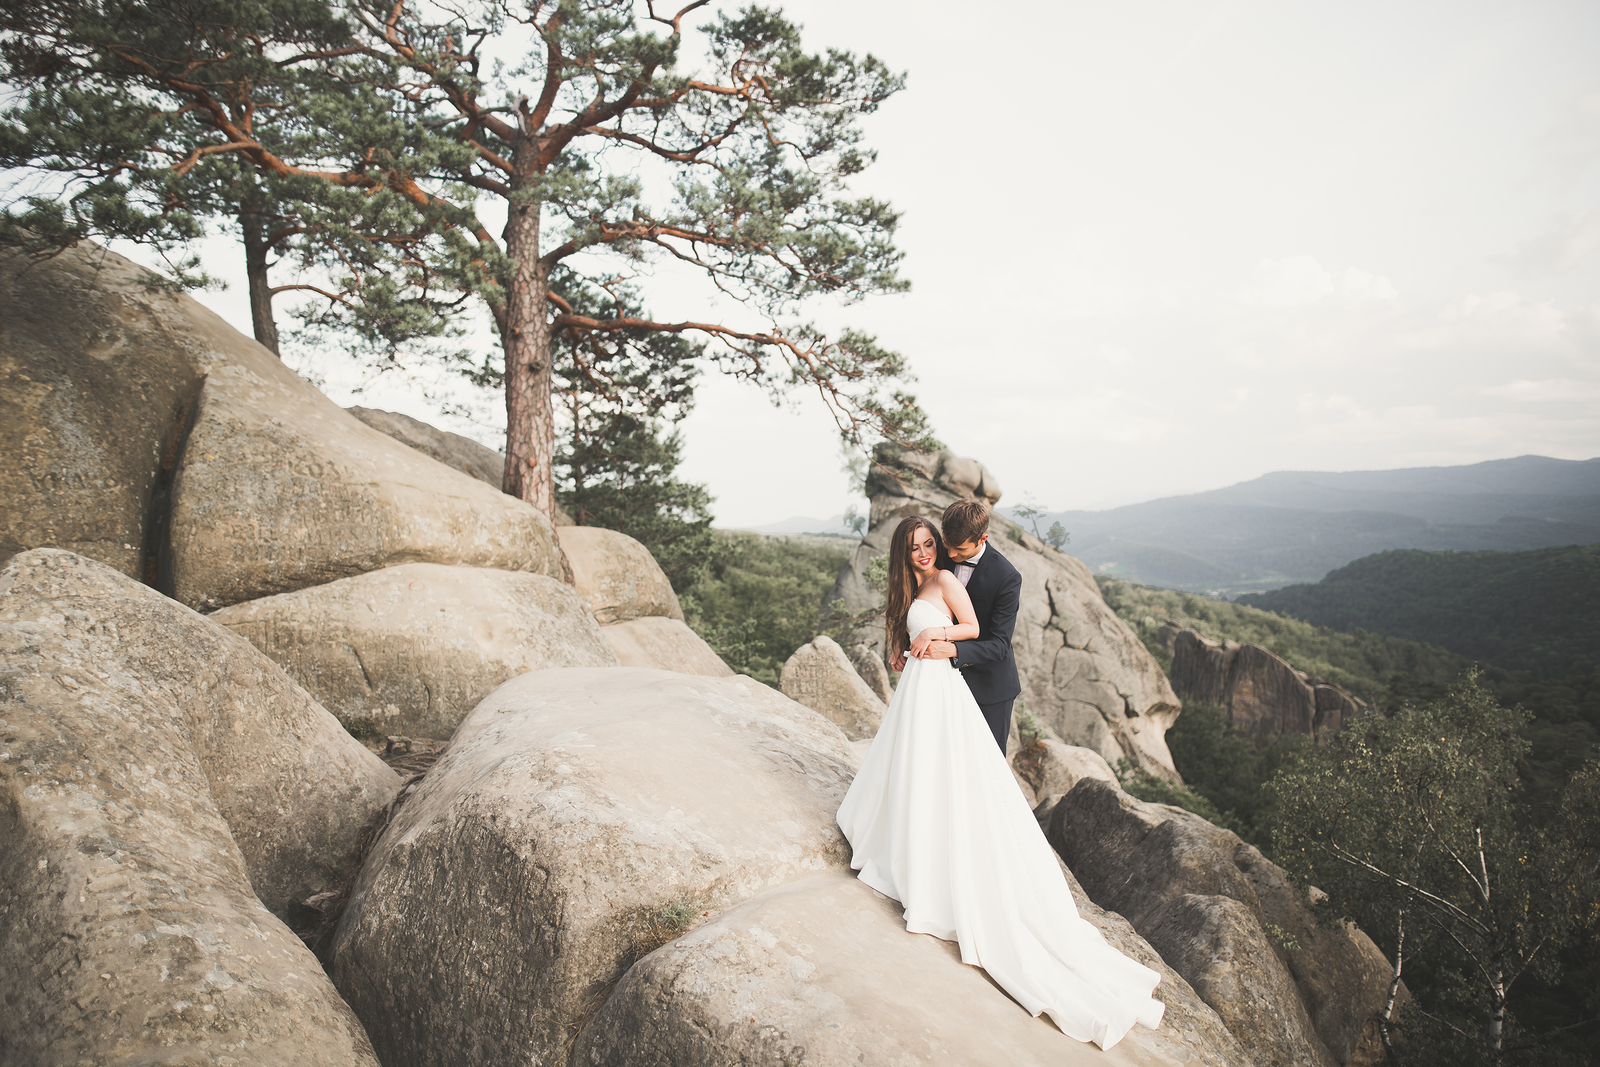 Newlyweds in a picturesque location